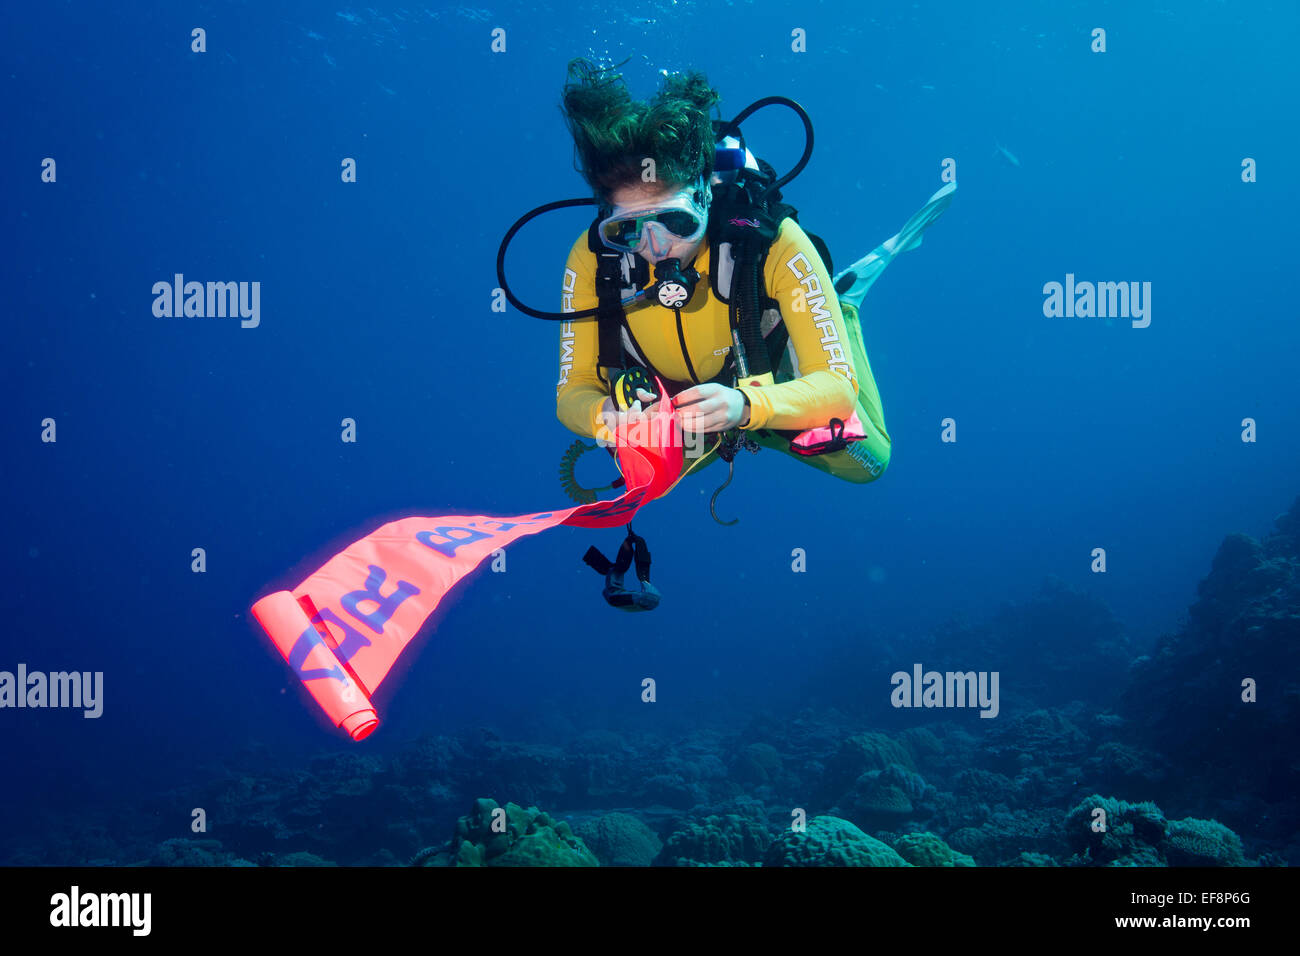 Diver going up, with a safety buoy, Indian Ocean Stock Photo